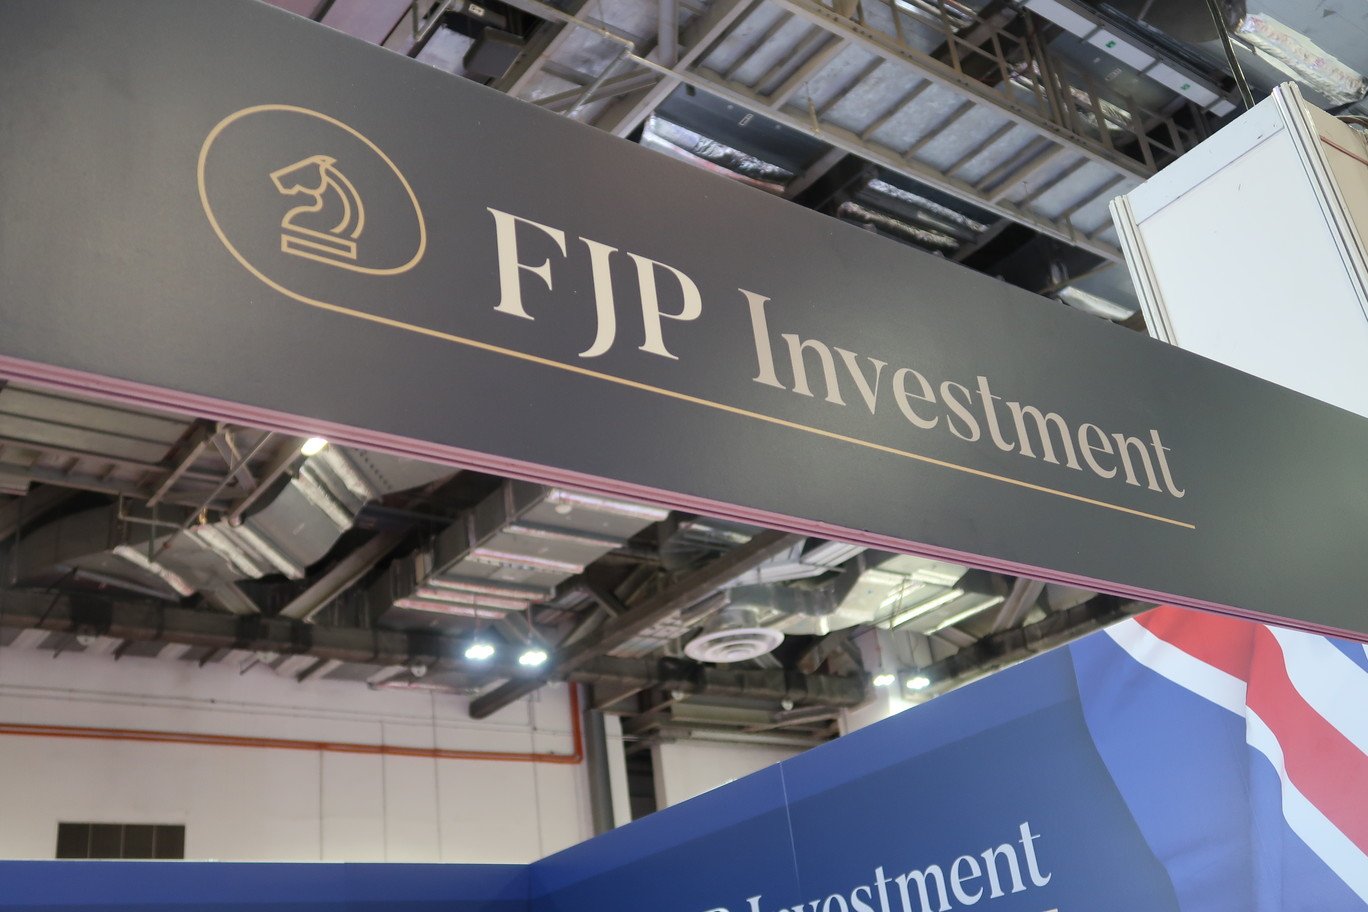 Photo Update: FJP Investment Attends Property Exhibition in Singapore